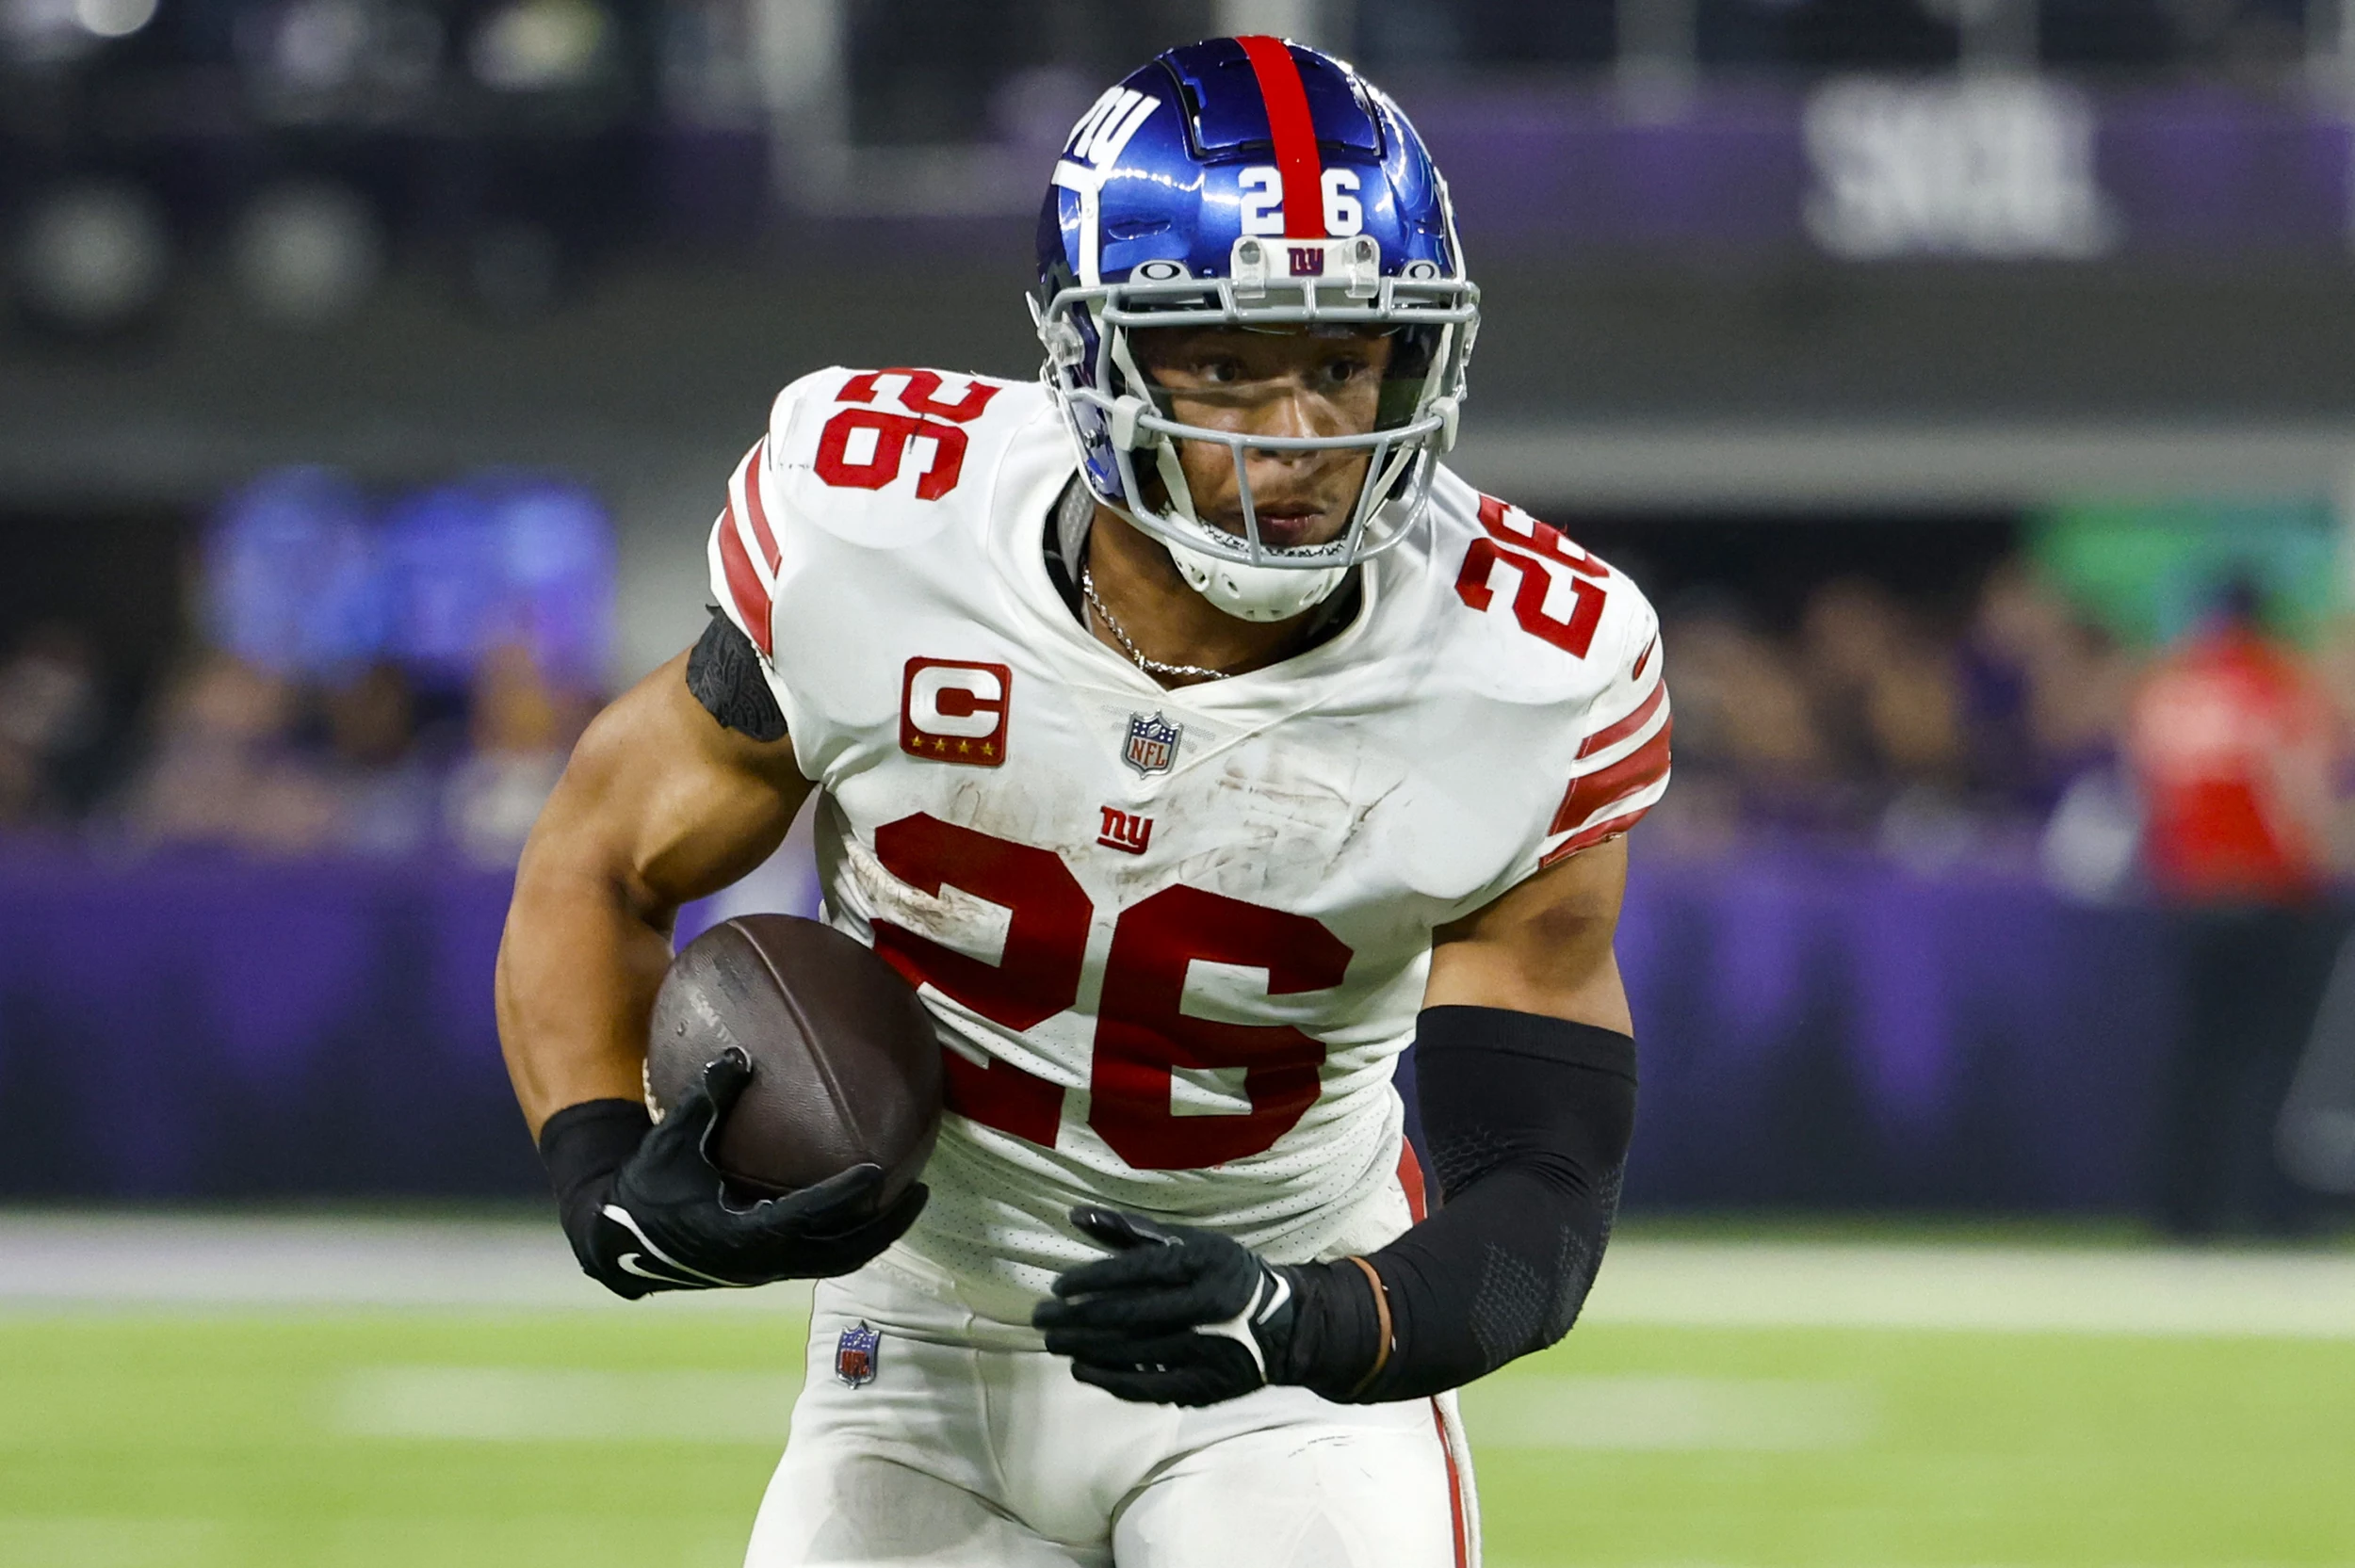 Giants could discuss Daniel Jones, Saquon Barkley contract extensions  during bye week, GM says